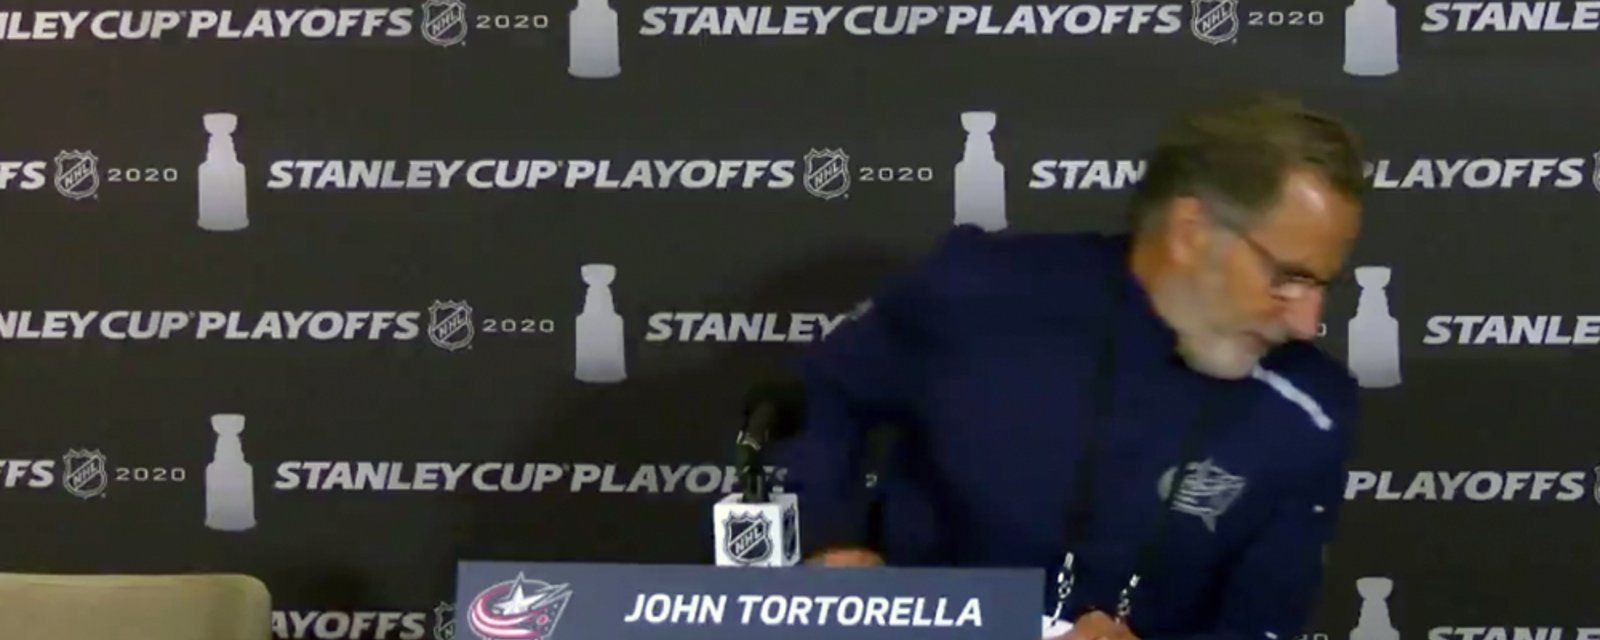 Tortorella serves up another post-game press conference for the ages